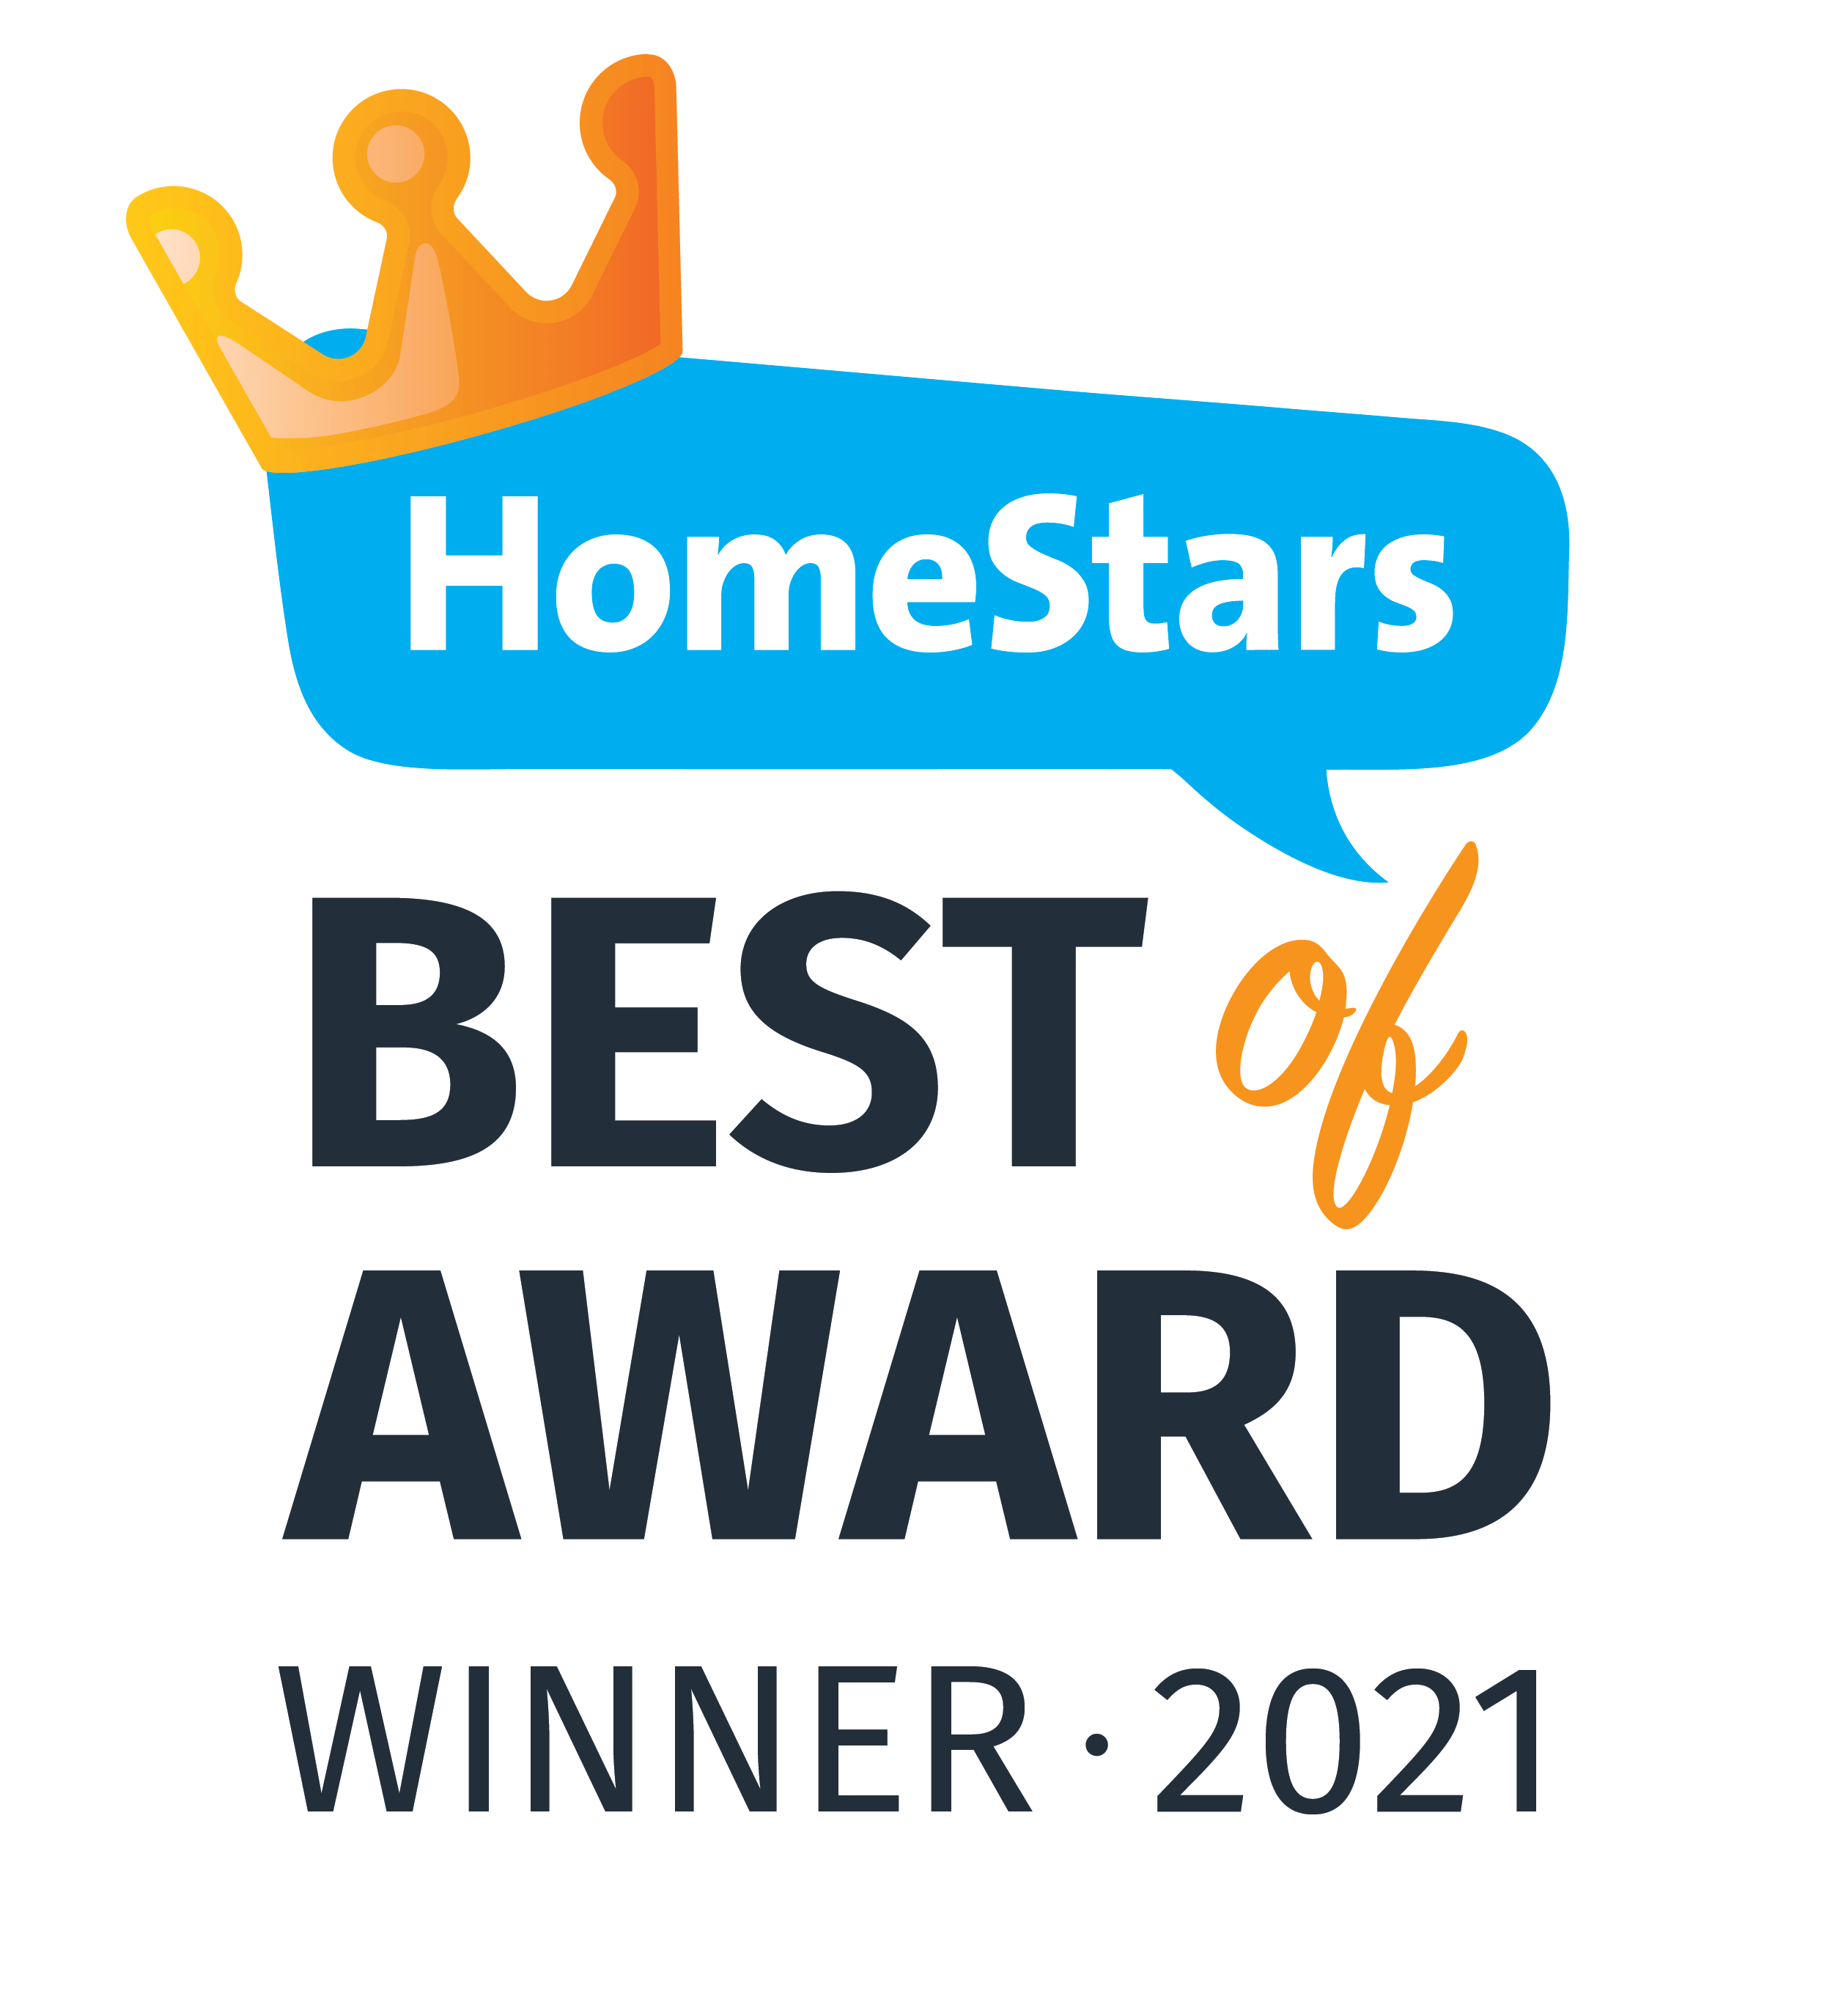 Chromatist team won the HomeStars Best of Award 2021 that celebrates pros who demonstrate consistency, integrity and unparalleled customer service. They produce high-quality work and always put their customers first.